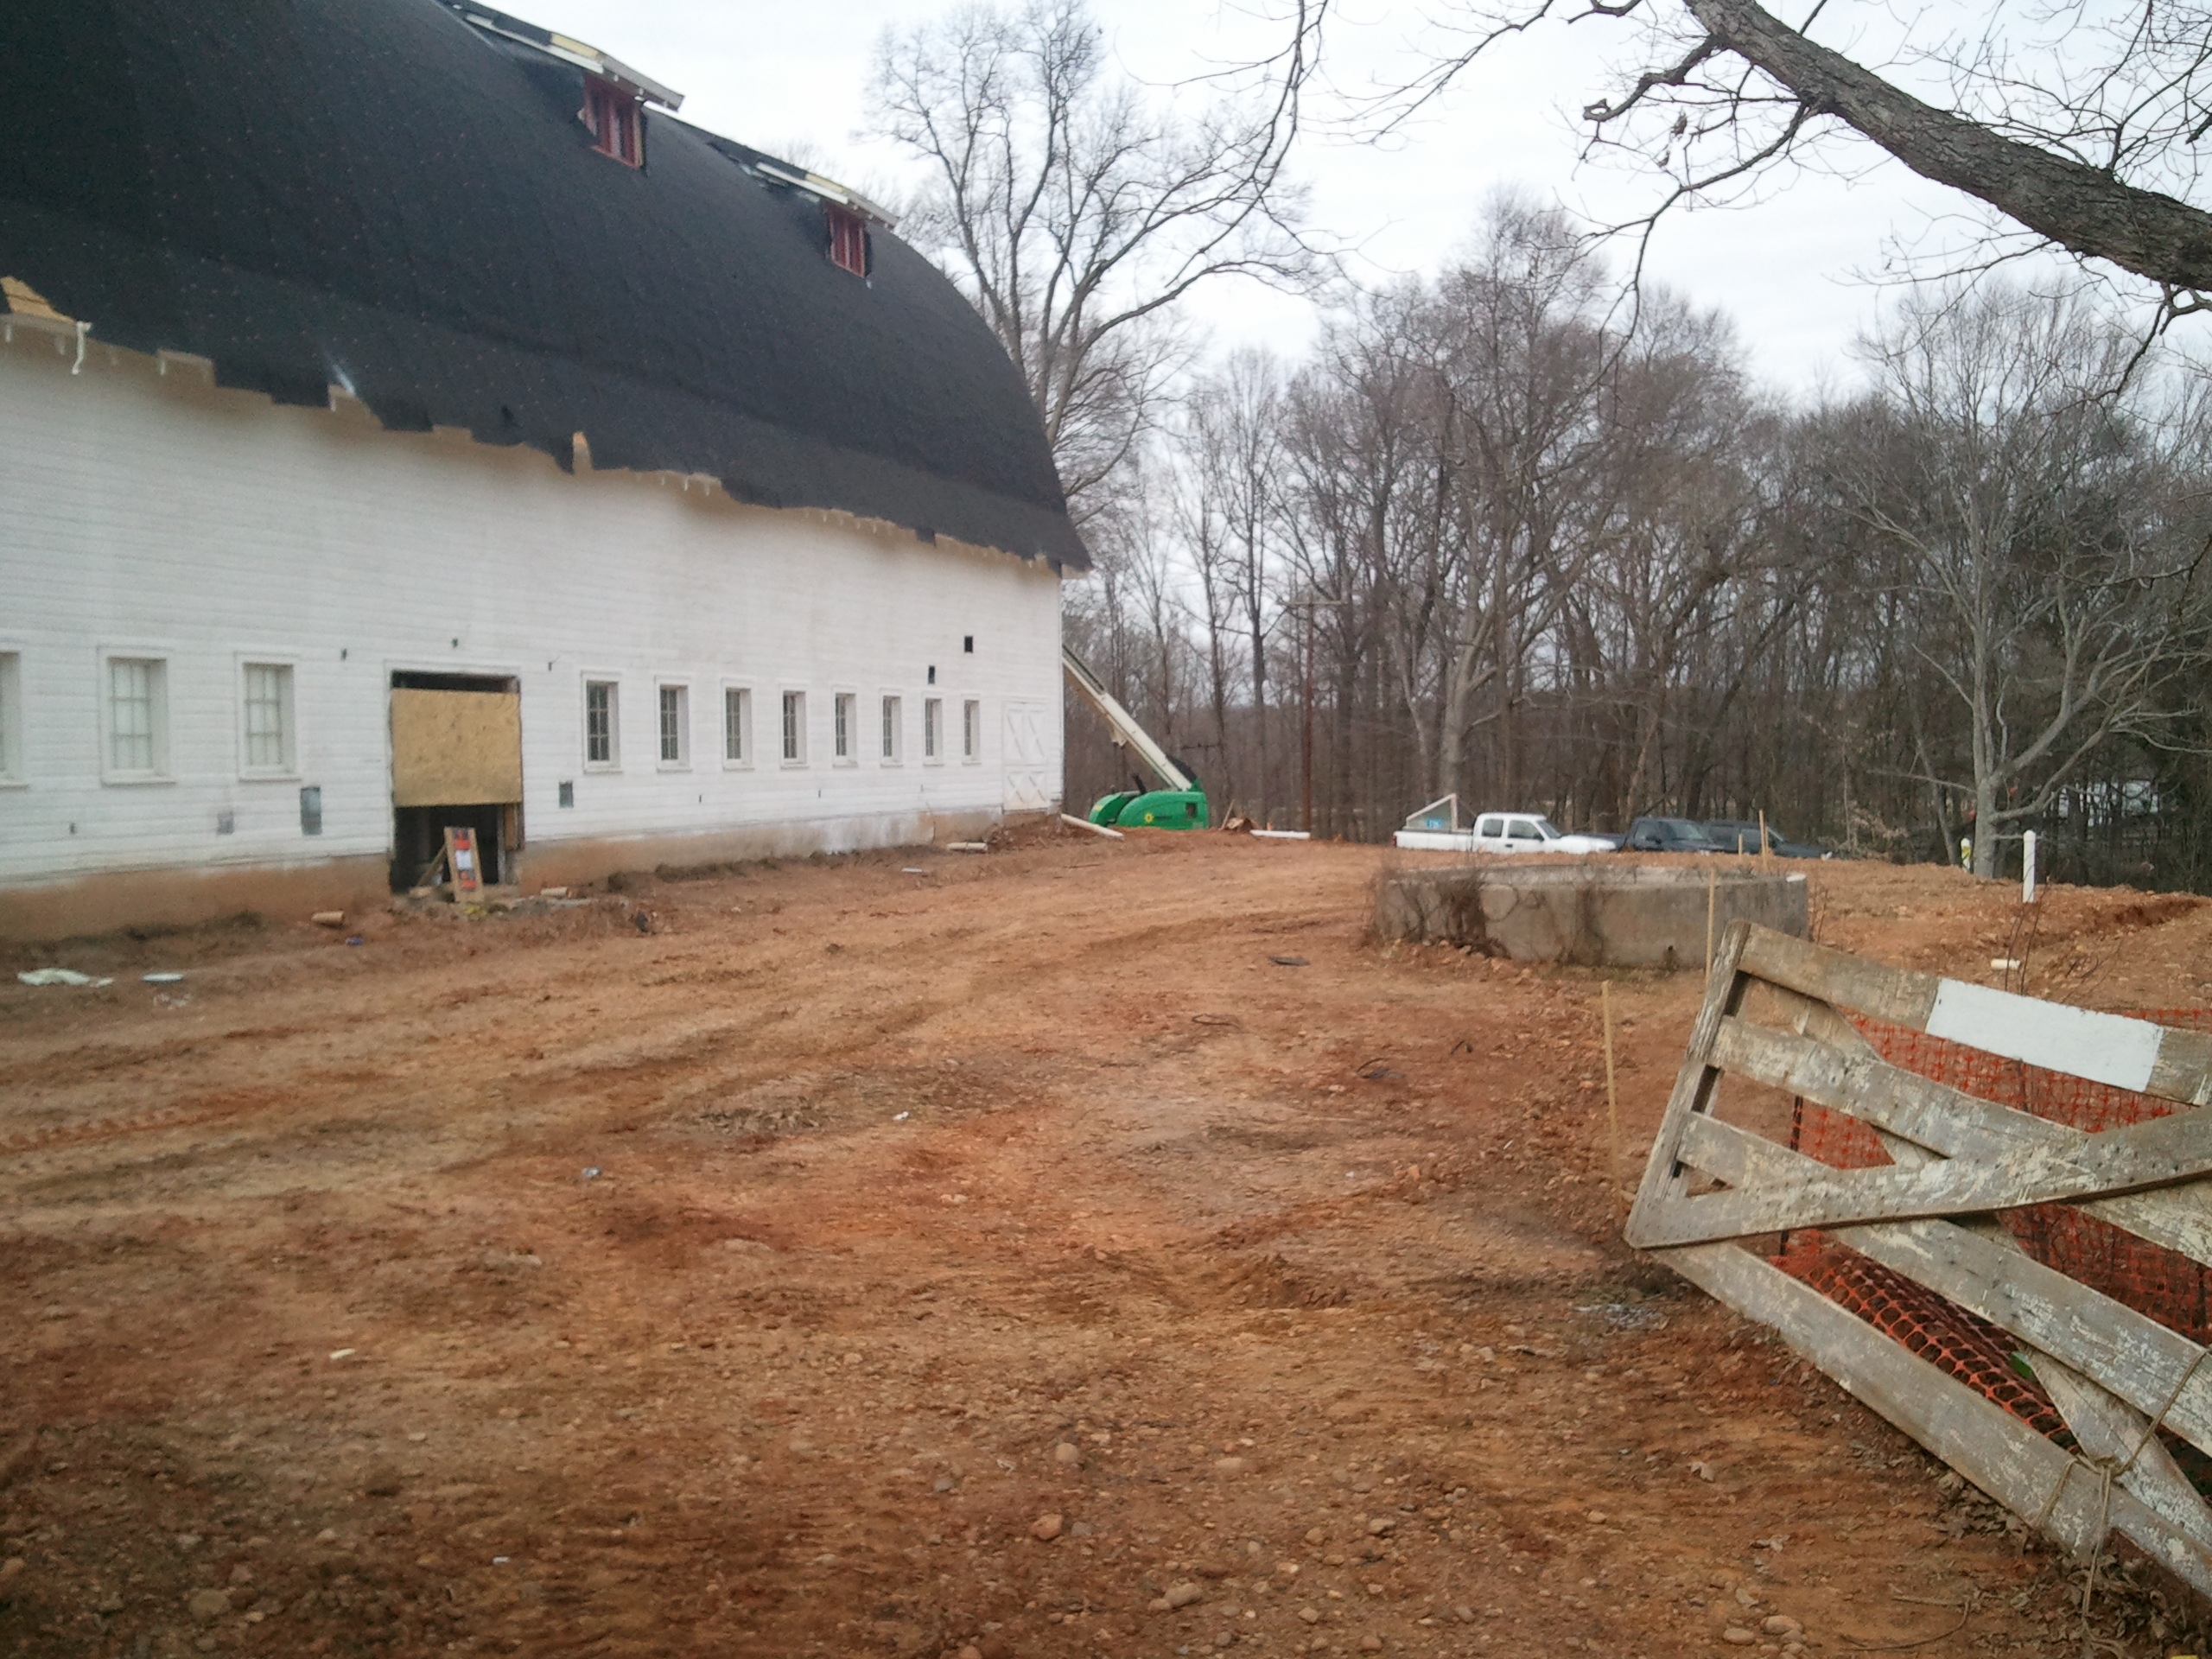 Barn Event Center - WinMock at Kinderton - A view of the East Terrace